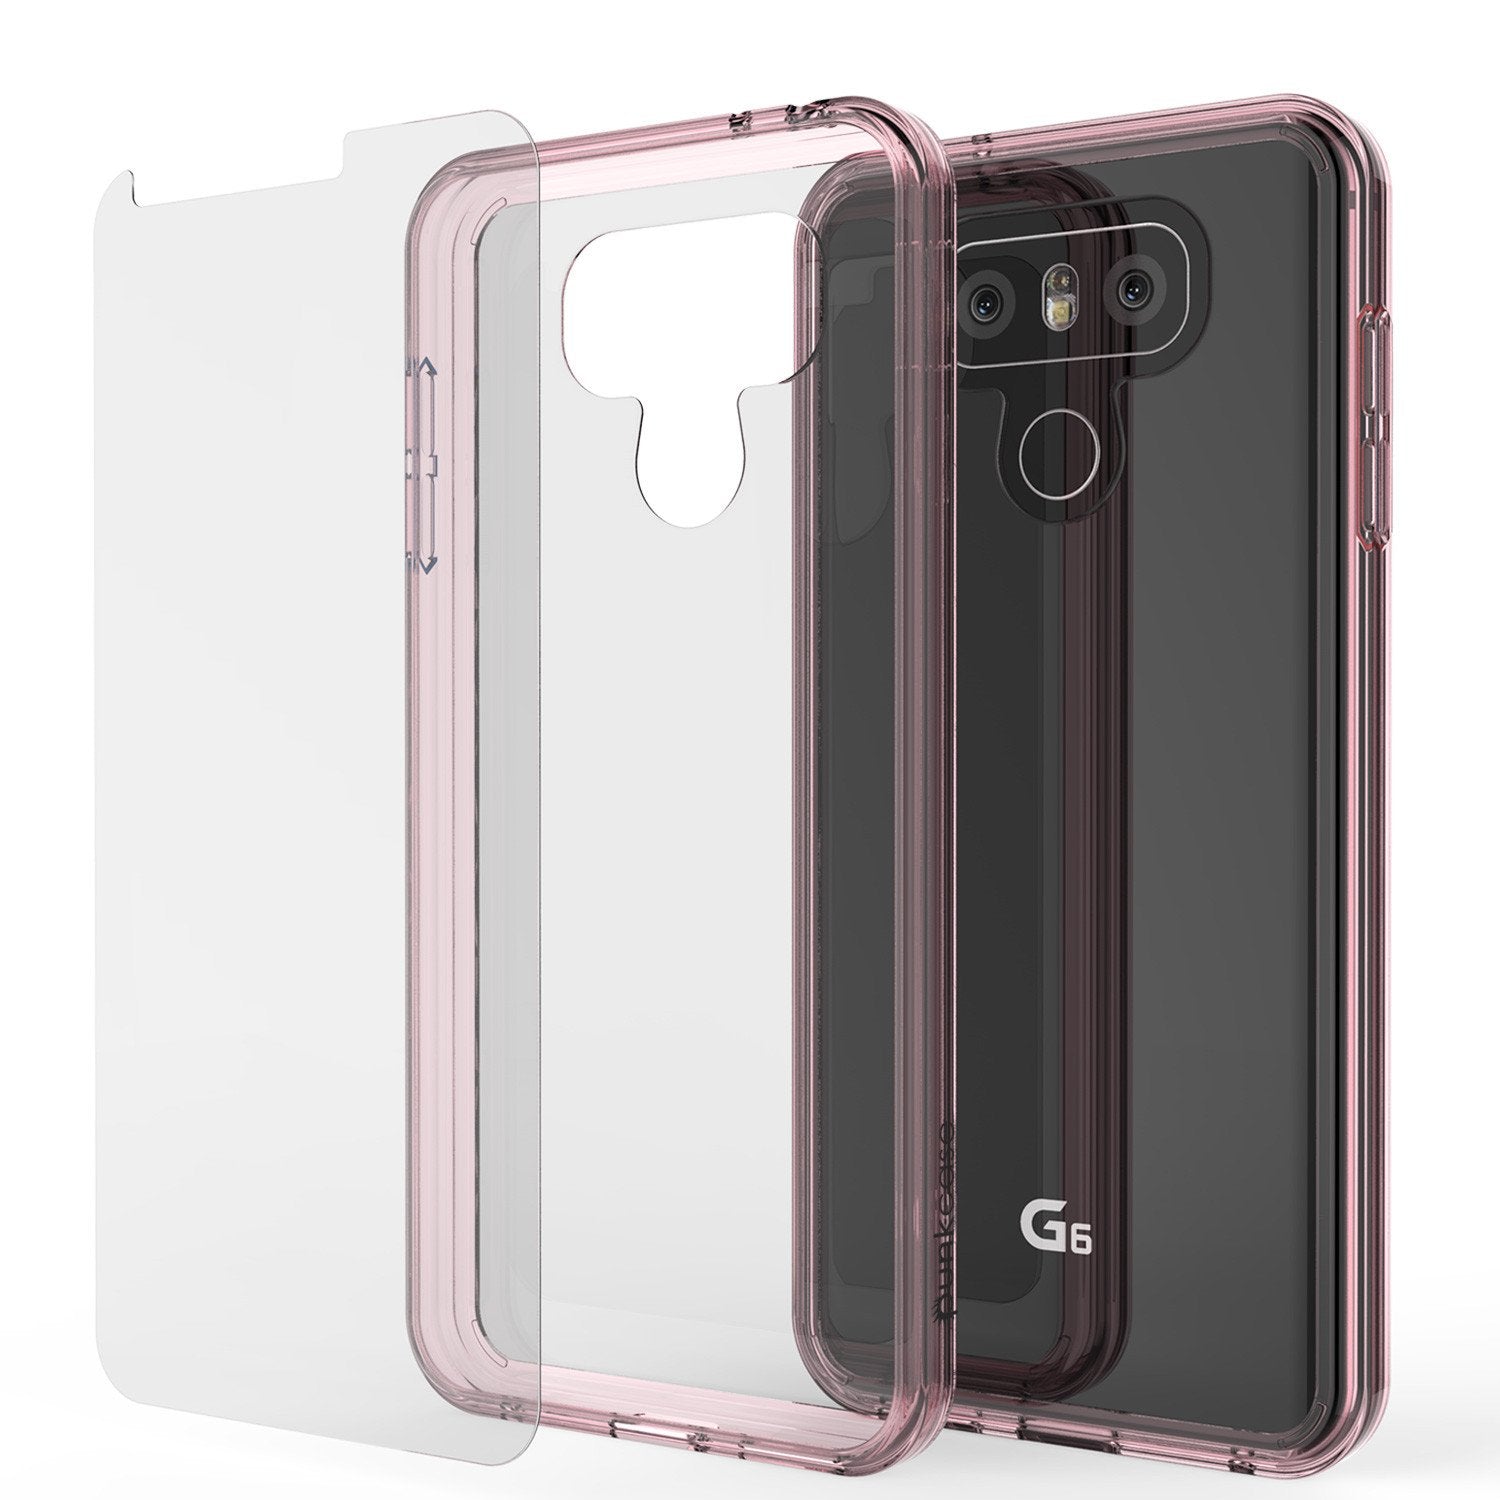 LG G6 Case Punkcase® LUCID 2.0 Crystal Pink Series w/ PUNK SHIELD Screen Protector | Ultra Fit